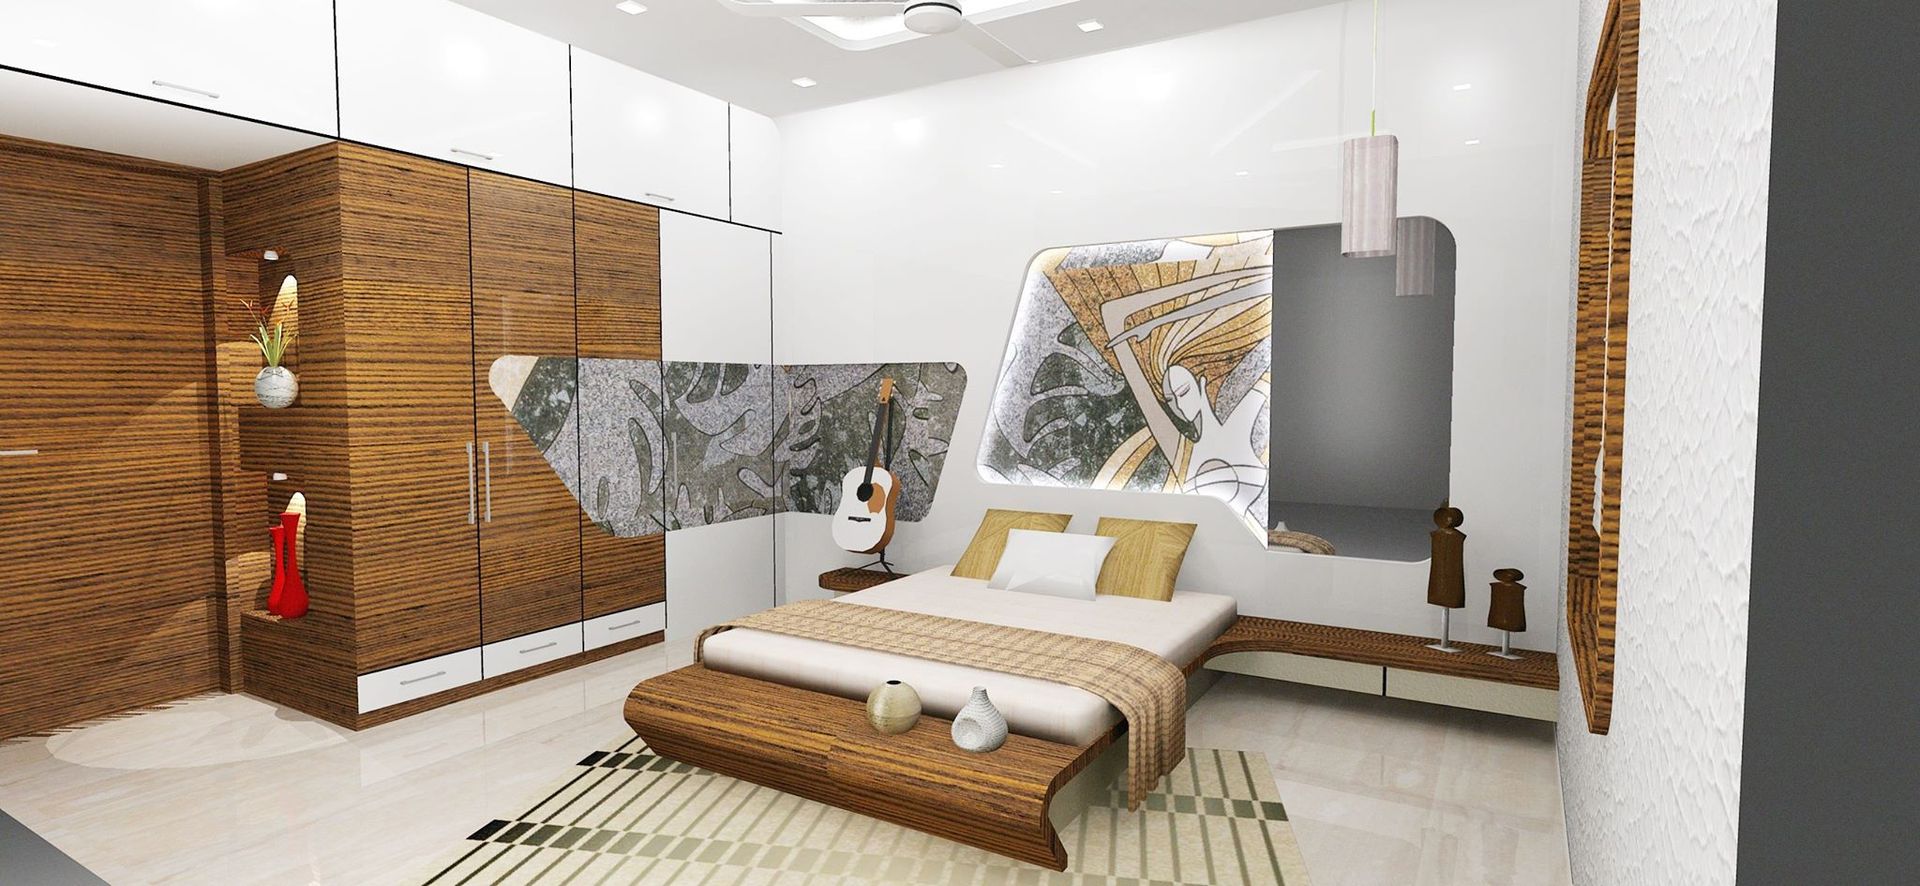 Bedroom Designs, Archsmith project consultant Archsmith project consultant Habitaciones modernas